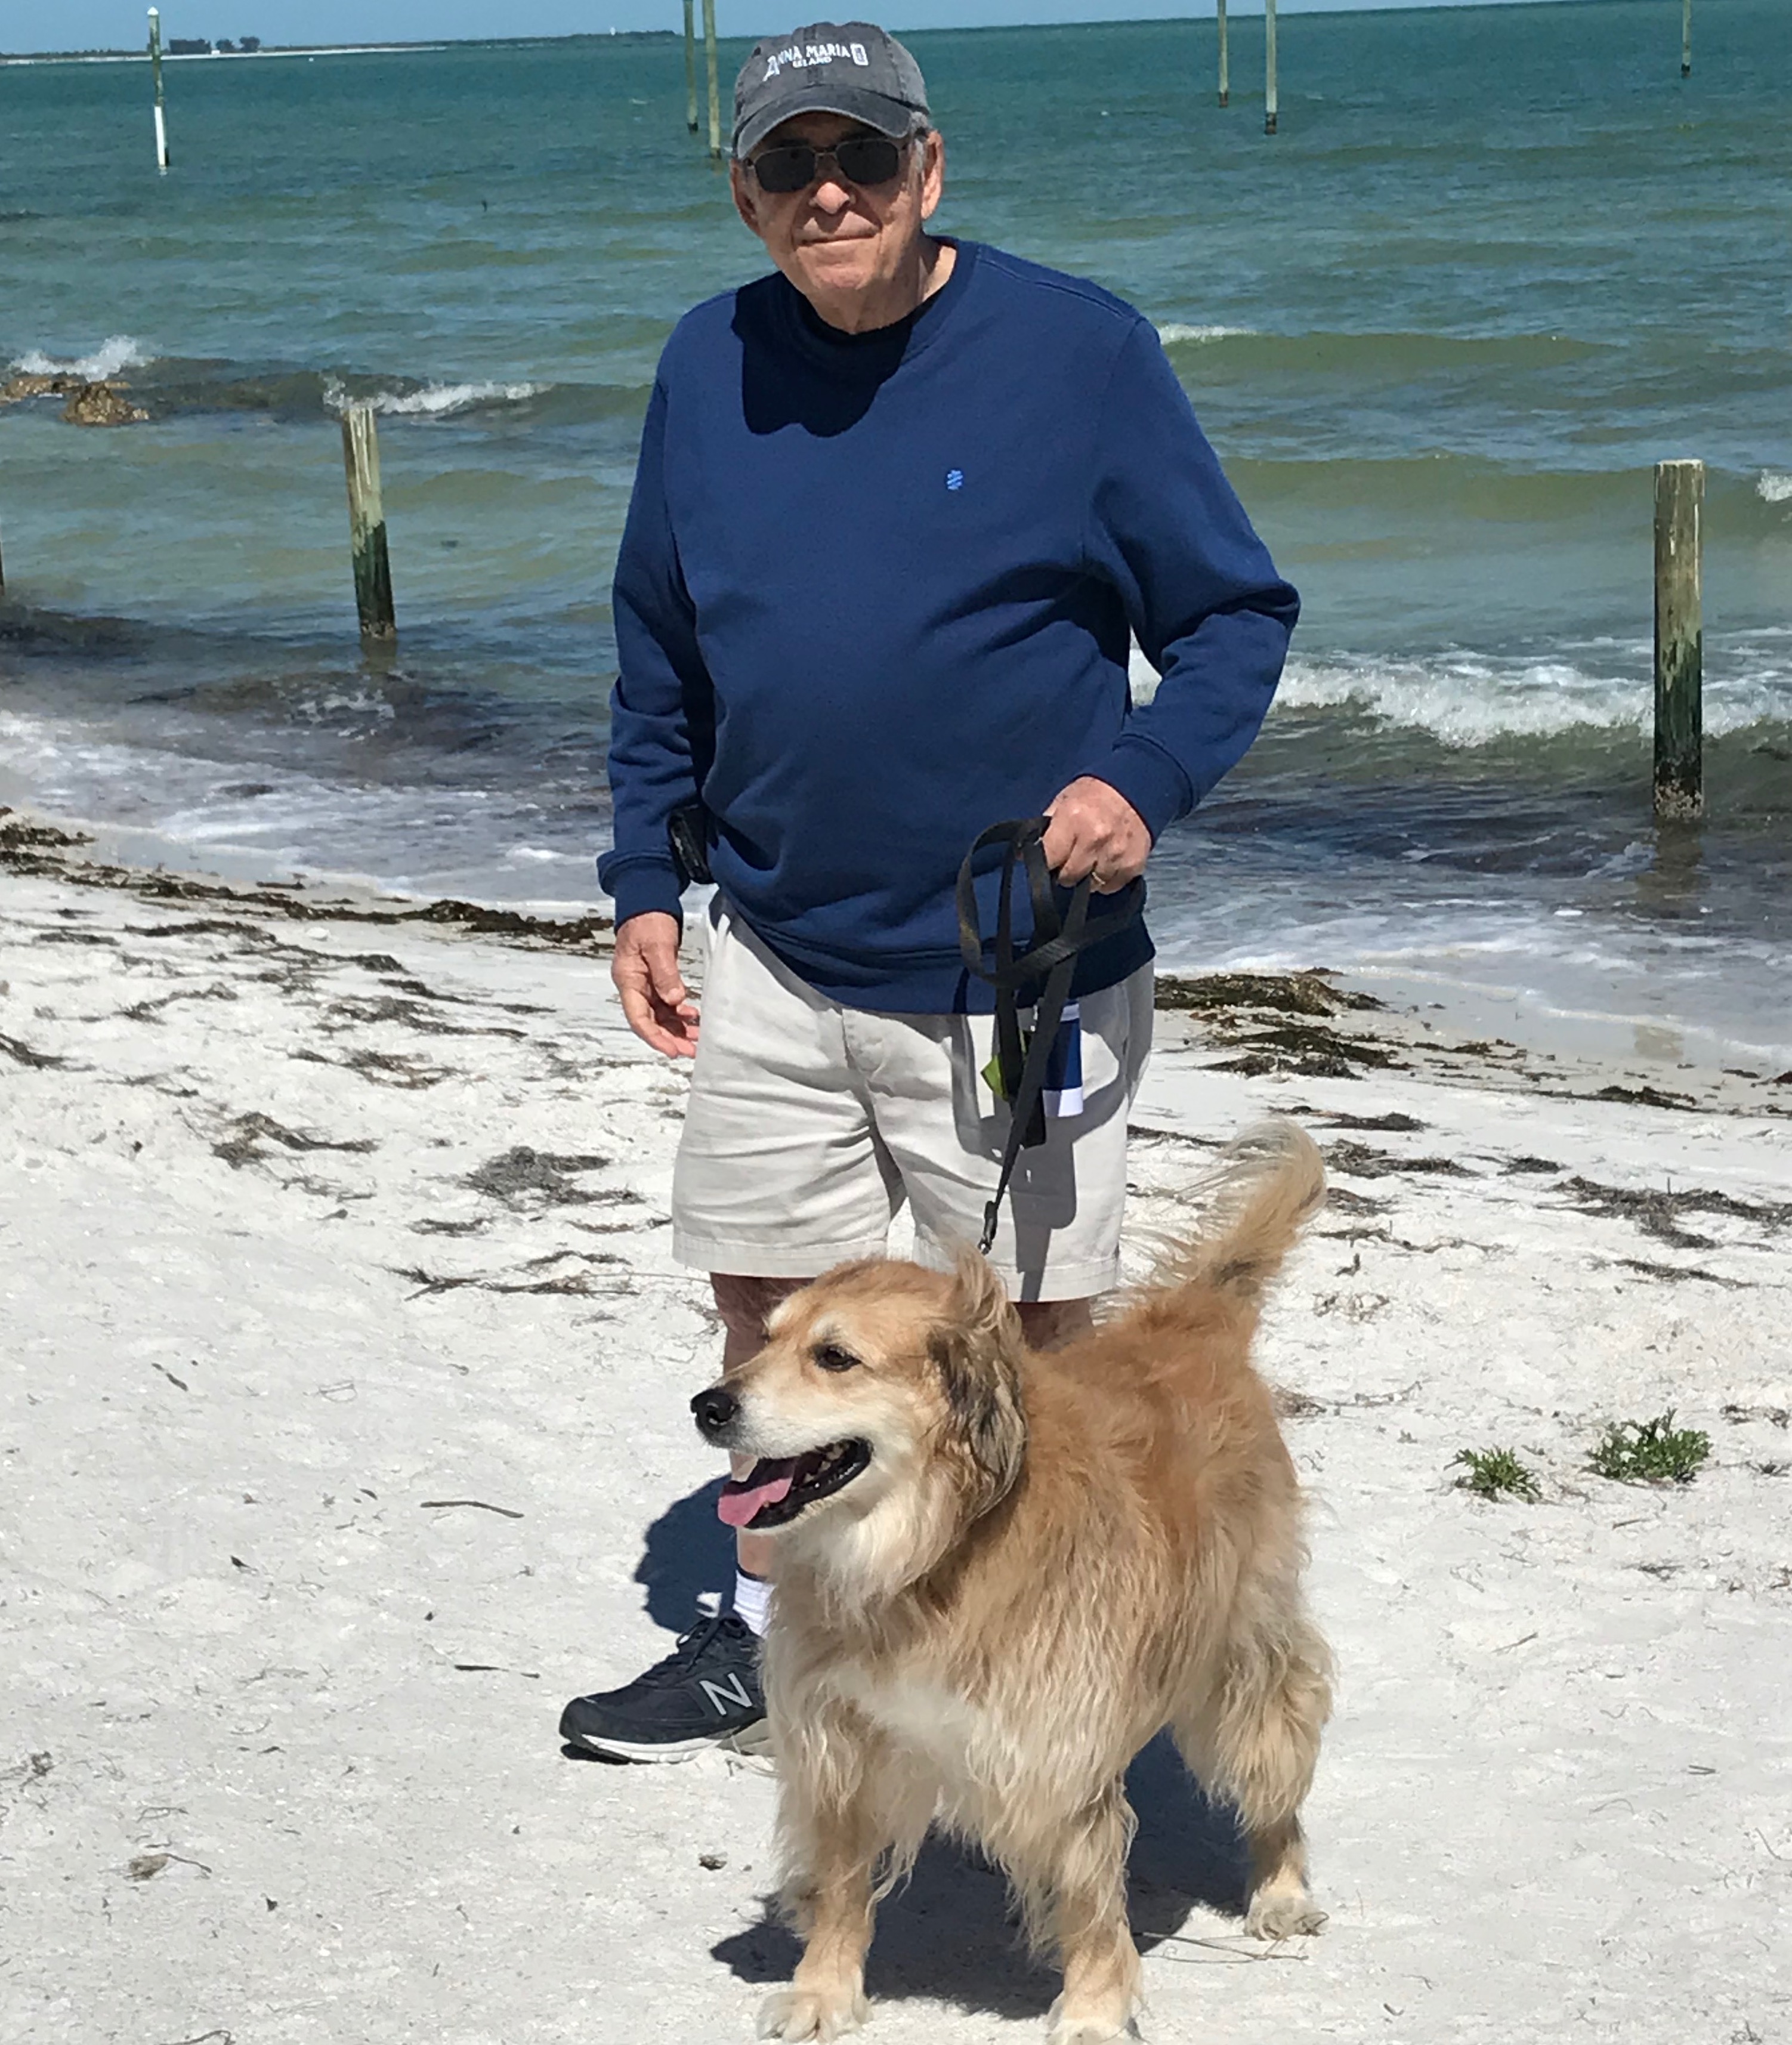 Owner and dog on beach